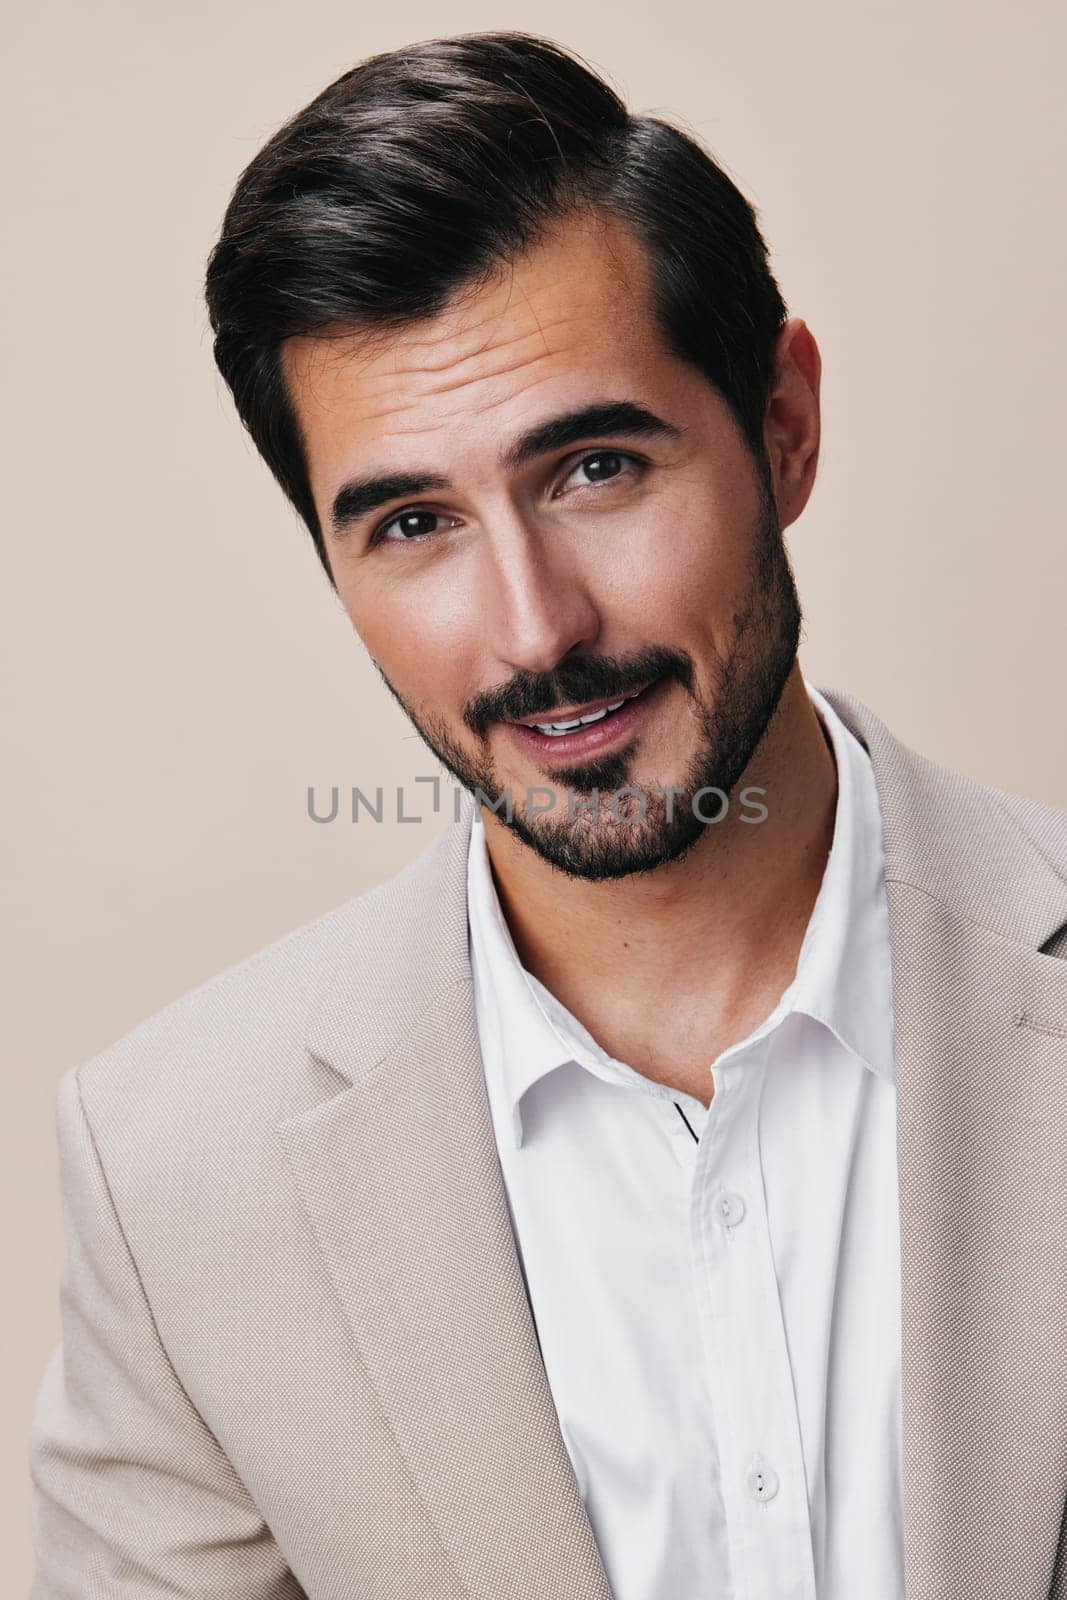 man copyspace arm portrait sexy young business happy beige handsome smiling job posing occupation businessman formal model attractive male executive suit